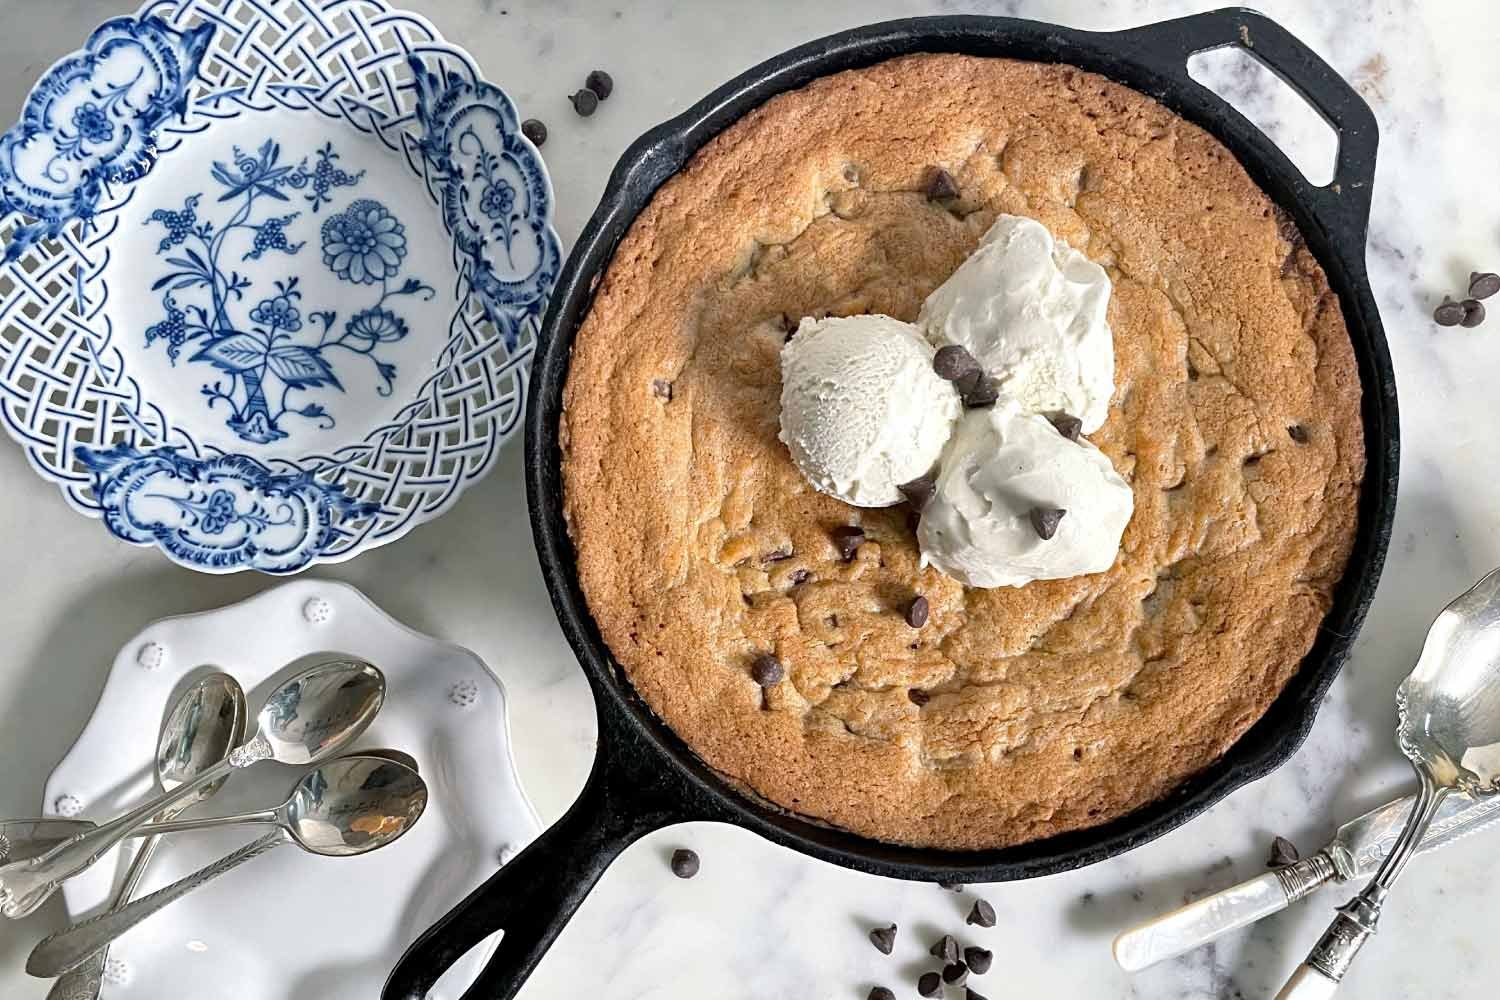 Cast Iron Skillet Chocolate Chip Cookie with Sea Salt Caramel — Mary DiSomma